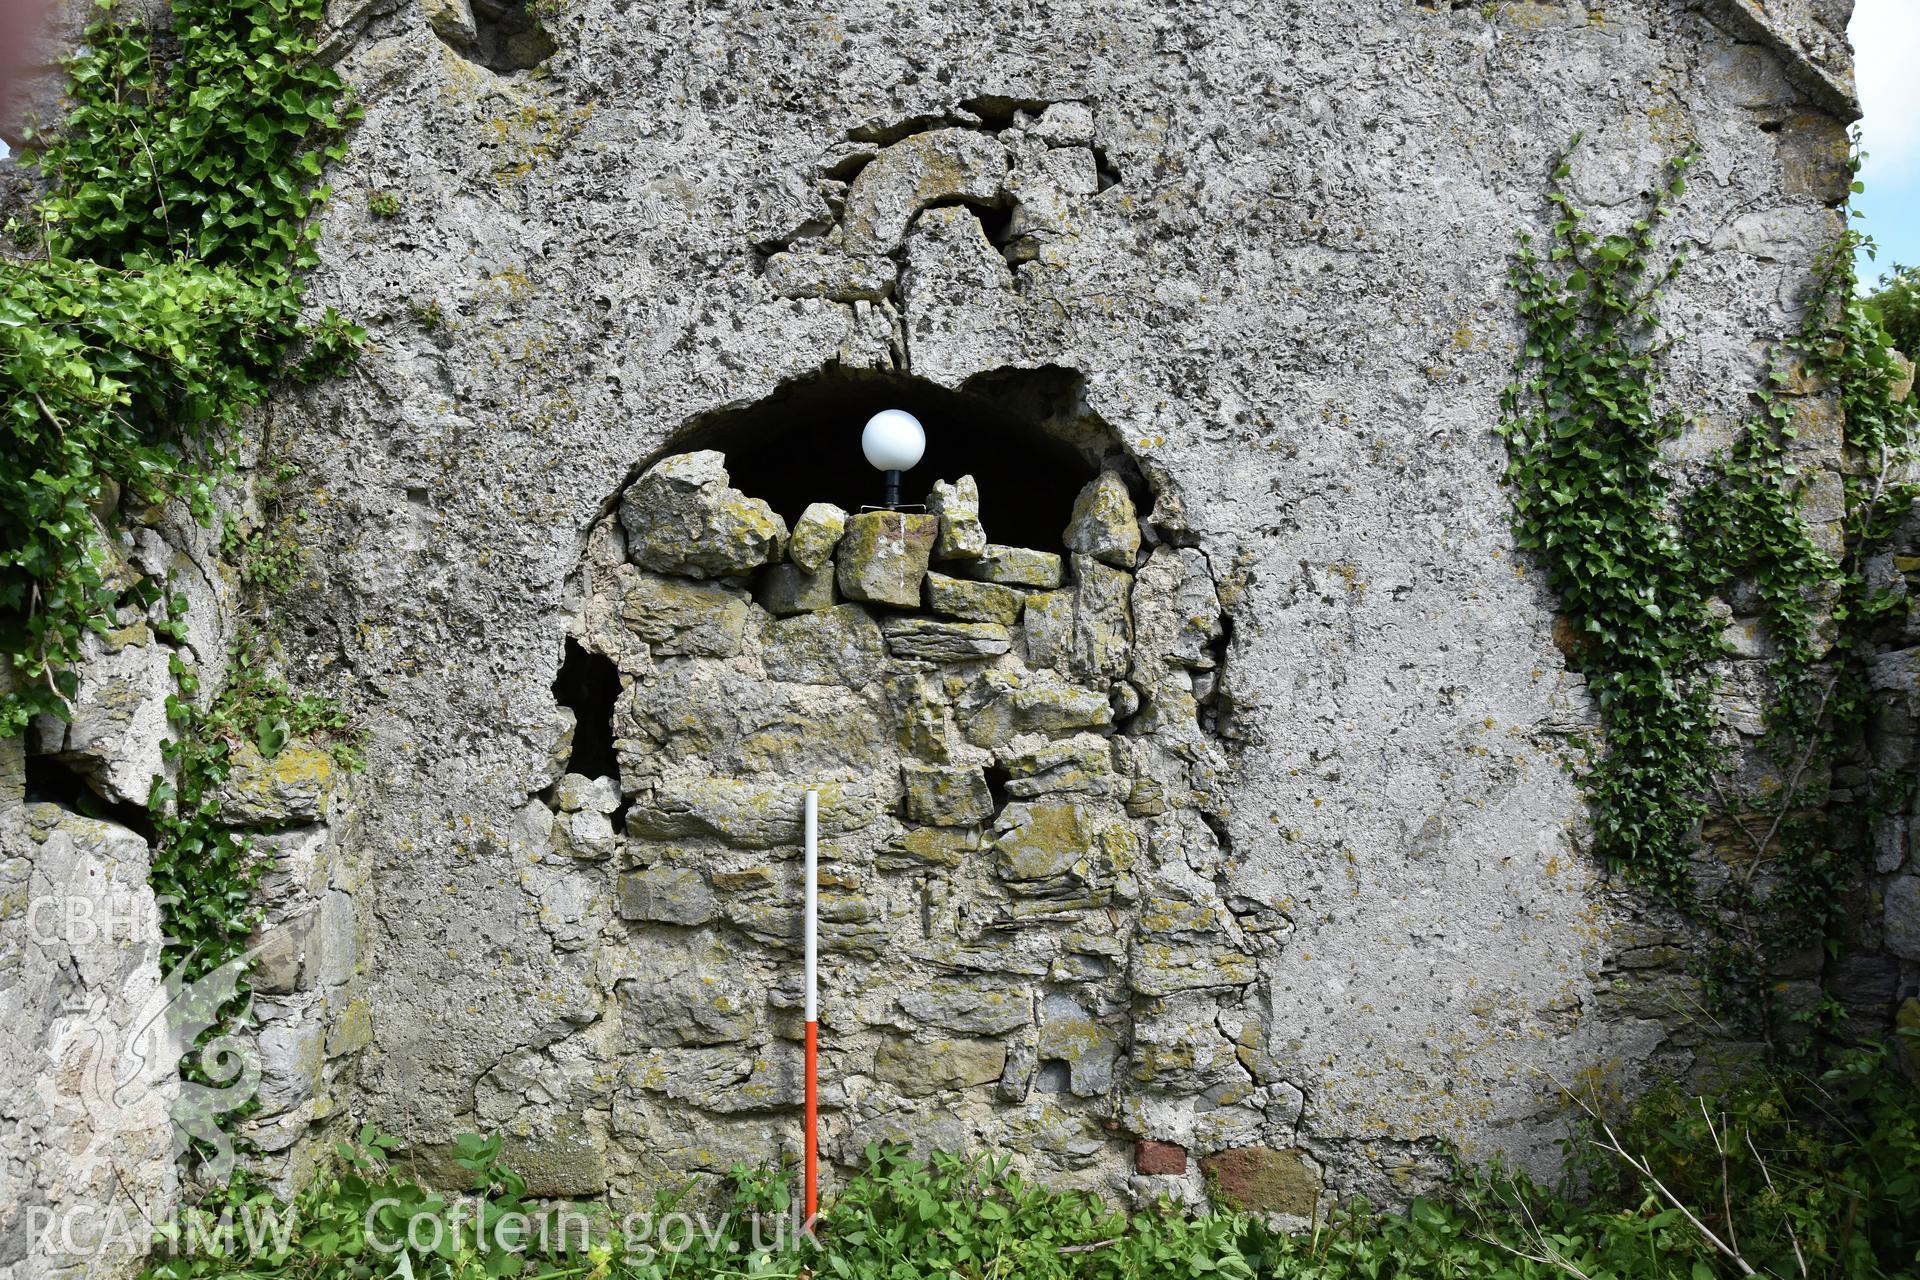 Investigator's photographic survey of the church on Puffin Island or Ynys Seiriol for the CHERISH Project. View from south showing the blocked archway into the tower from the transept on the south side. ? Crown: CHERISH PROJECT 2018. Produced with EU funds through the Ireland Wales Co-operation Programme 2014-2020. All material made freely available through the Open Government Licence.